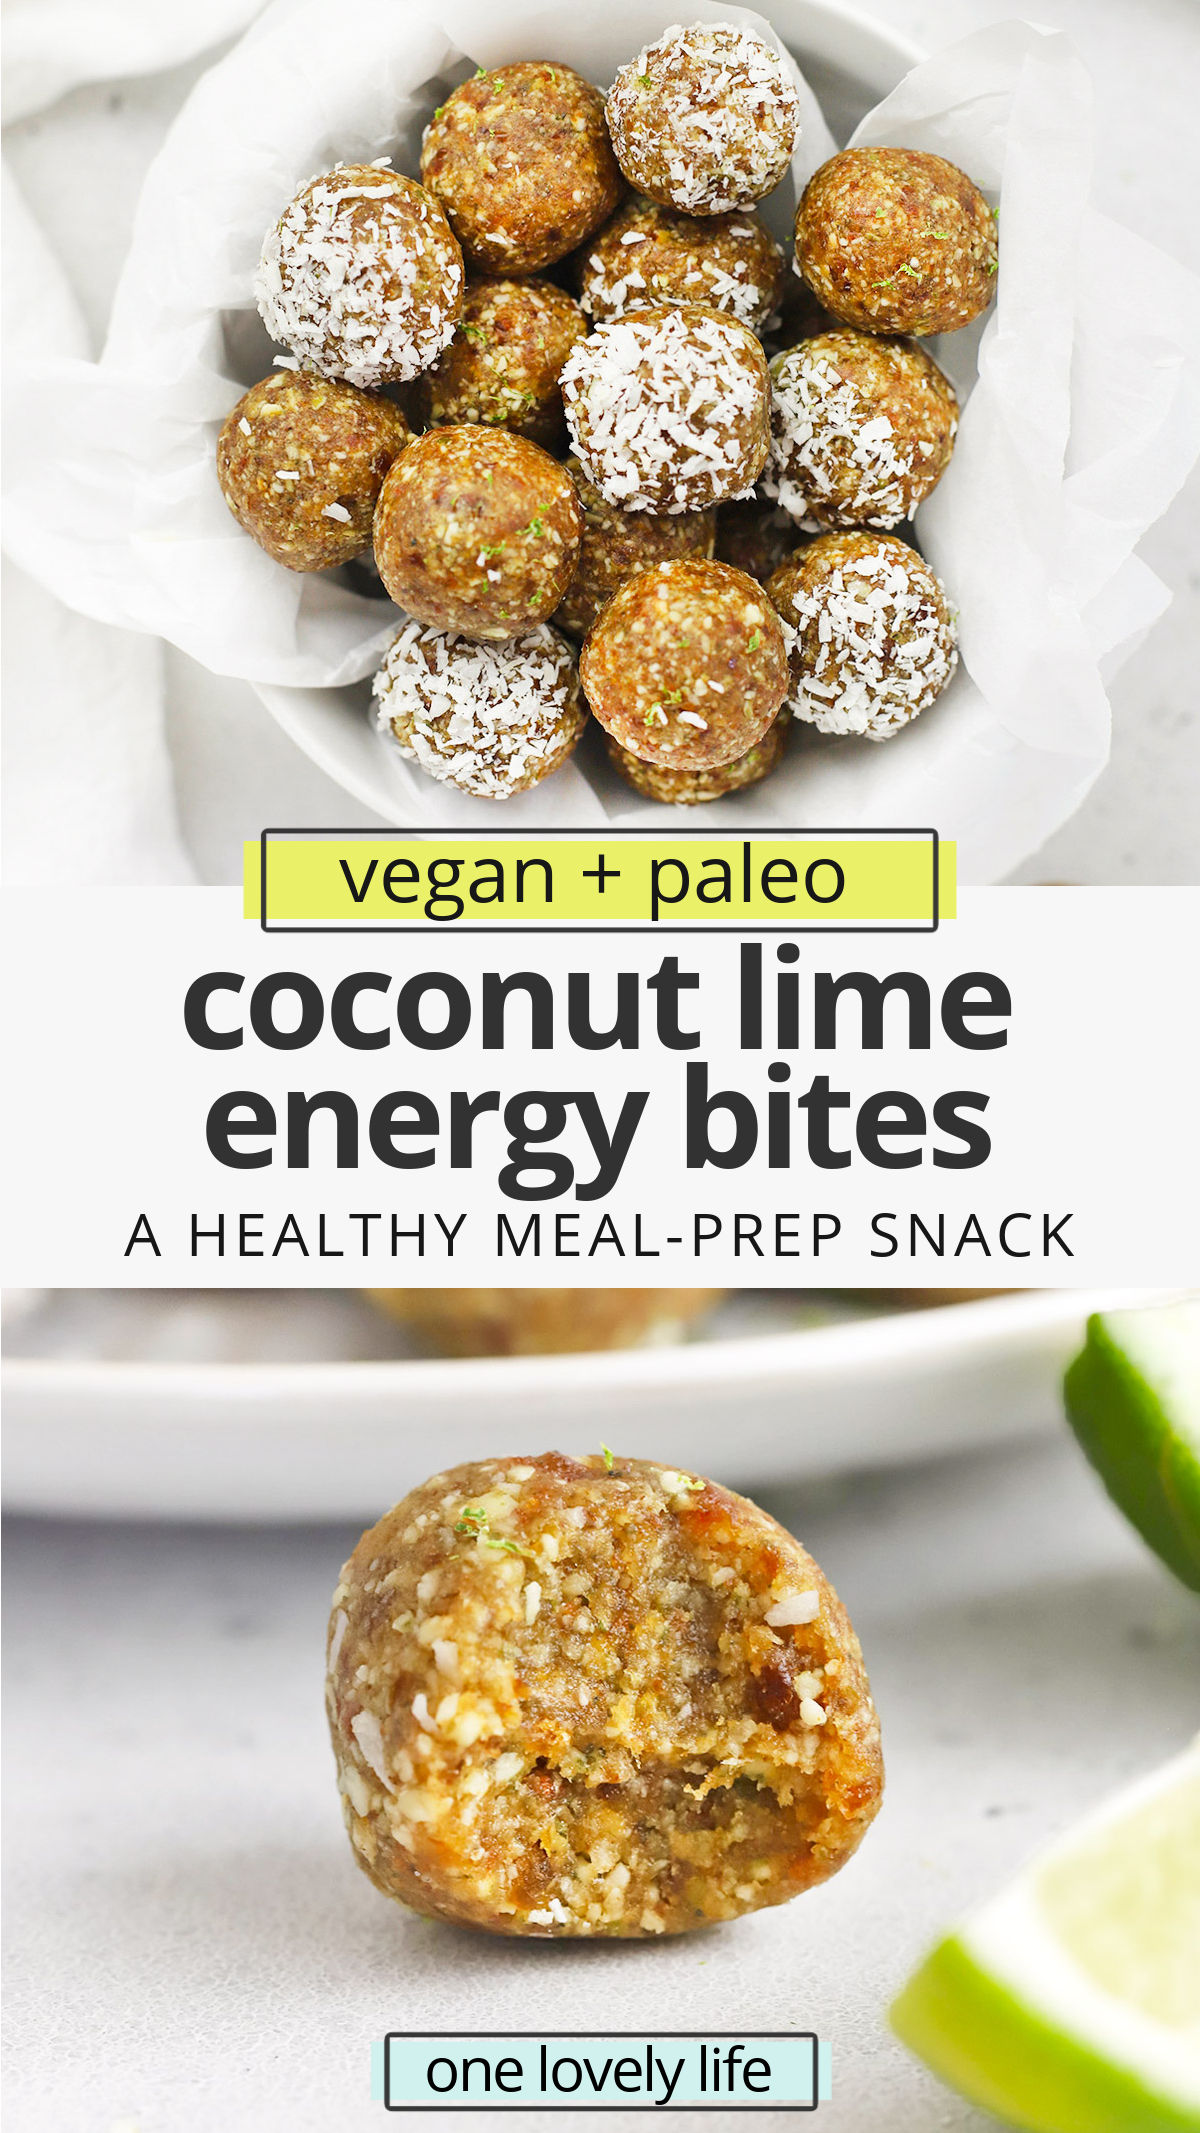 Coconut Lime Energy Bites - These nut-free lime energy bites are perfect for meal prep, healthy snacking, or packing in lunches. (Gluten free, vegan, and paleo approved!) // Nut Free snack // Nut free lunch idea // Nut free energy bites // #paleo #vegan #nutfree #energybites #energyballs